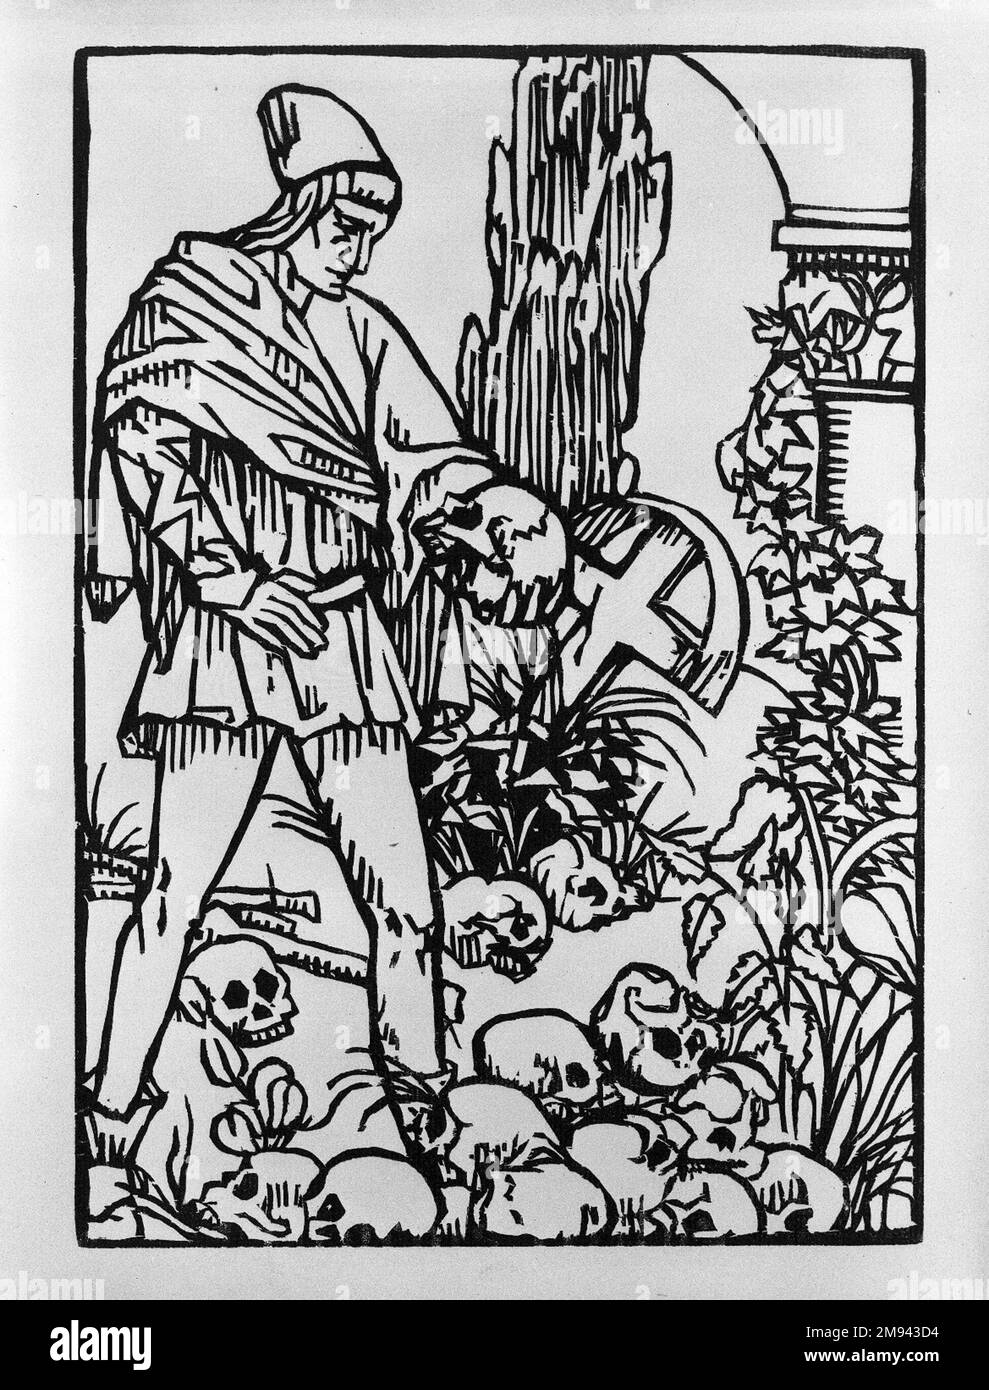 Warrior Holding a Skull Émile Bernard (French, 1868-1941). , 1918. Woodcut printed on laid paper, 10 13/16 x 7 5/8 in. (27.5 x 19.4 cm).   European Art 1918 Stock Photo